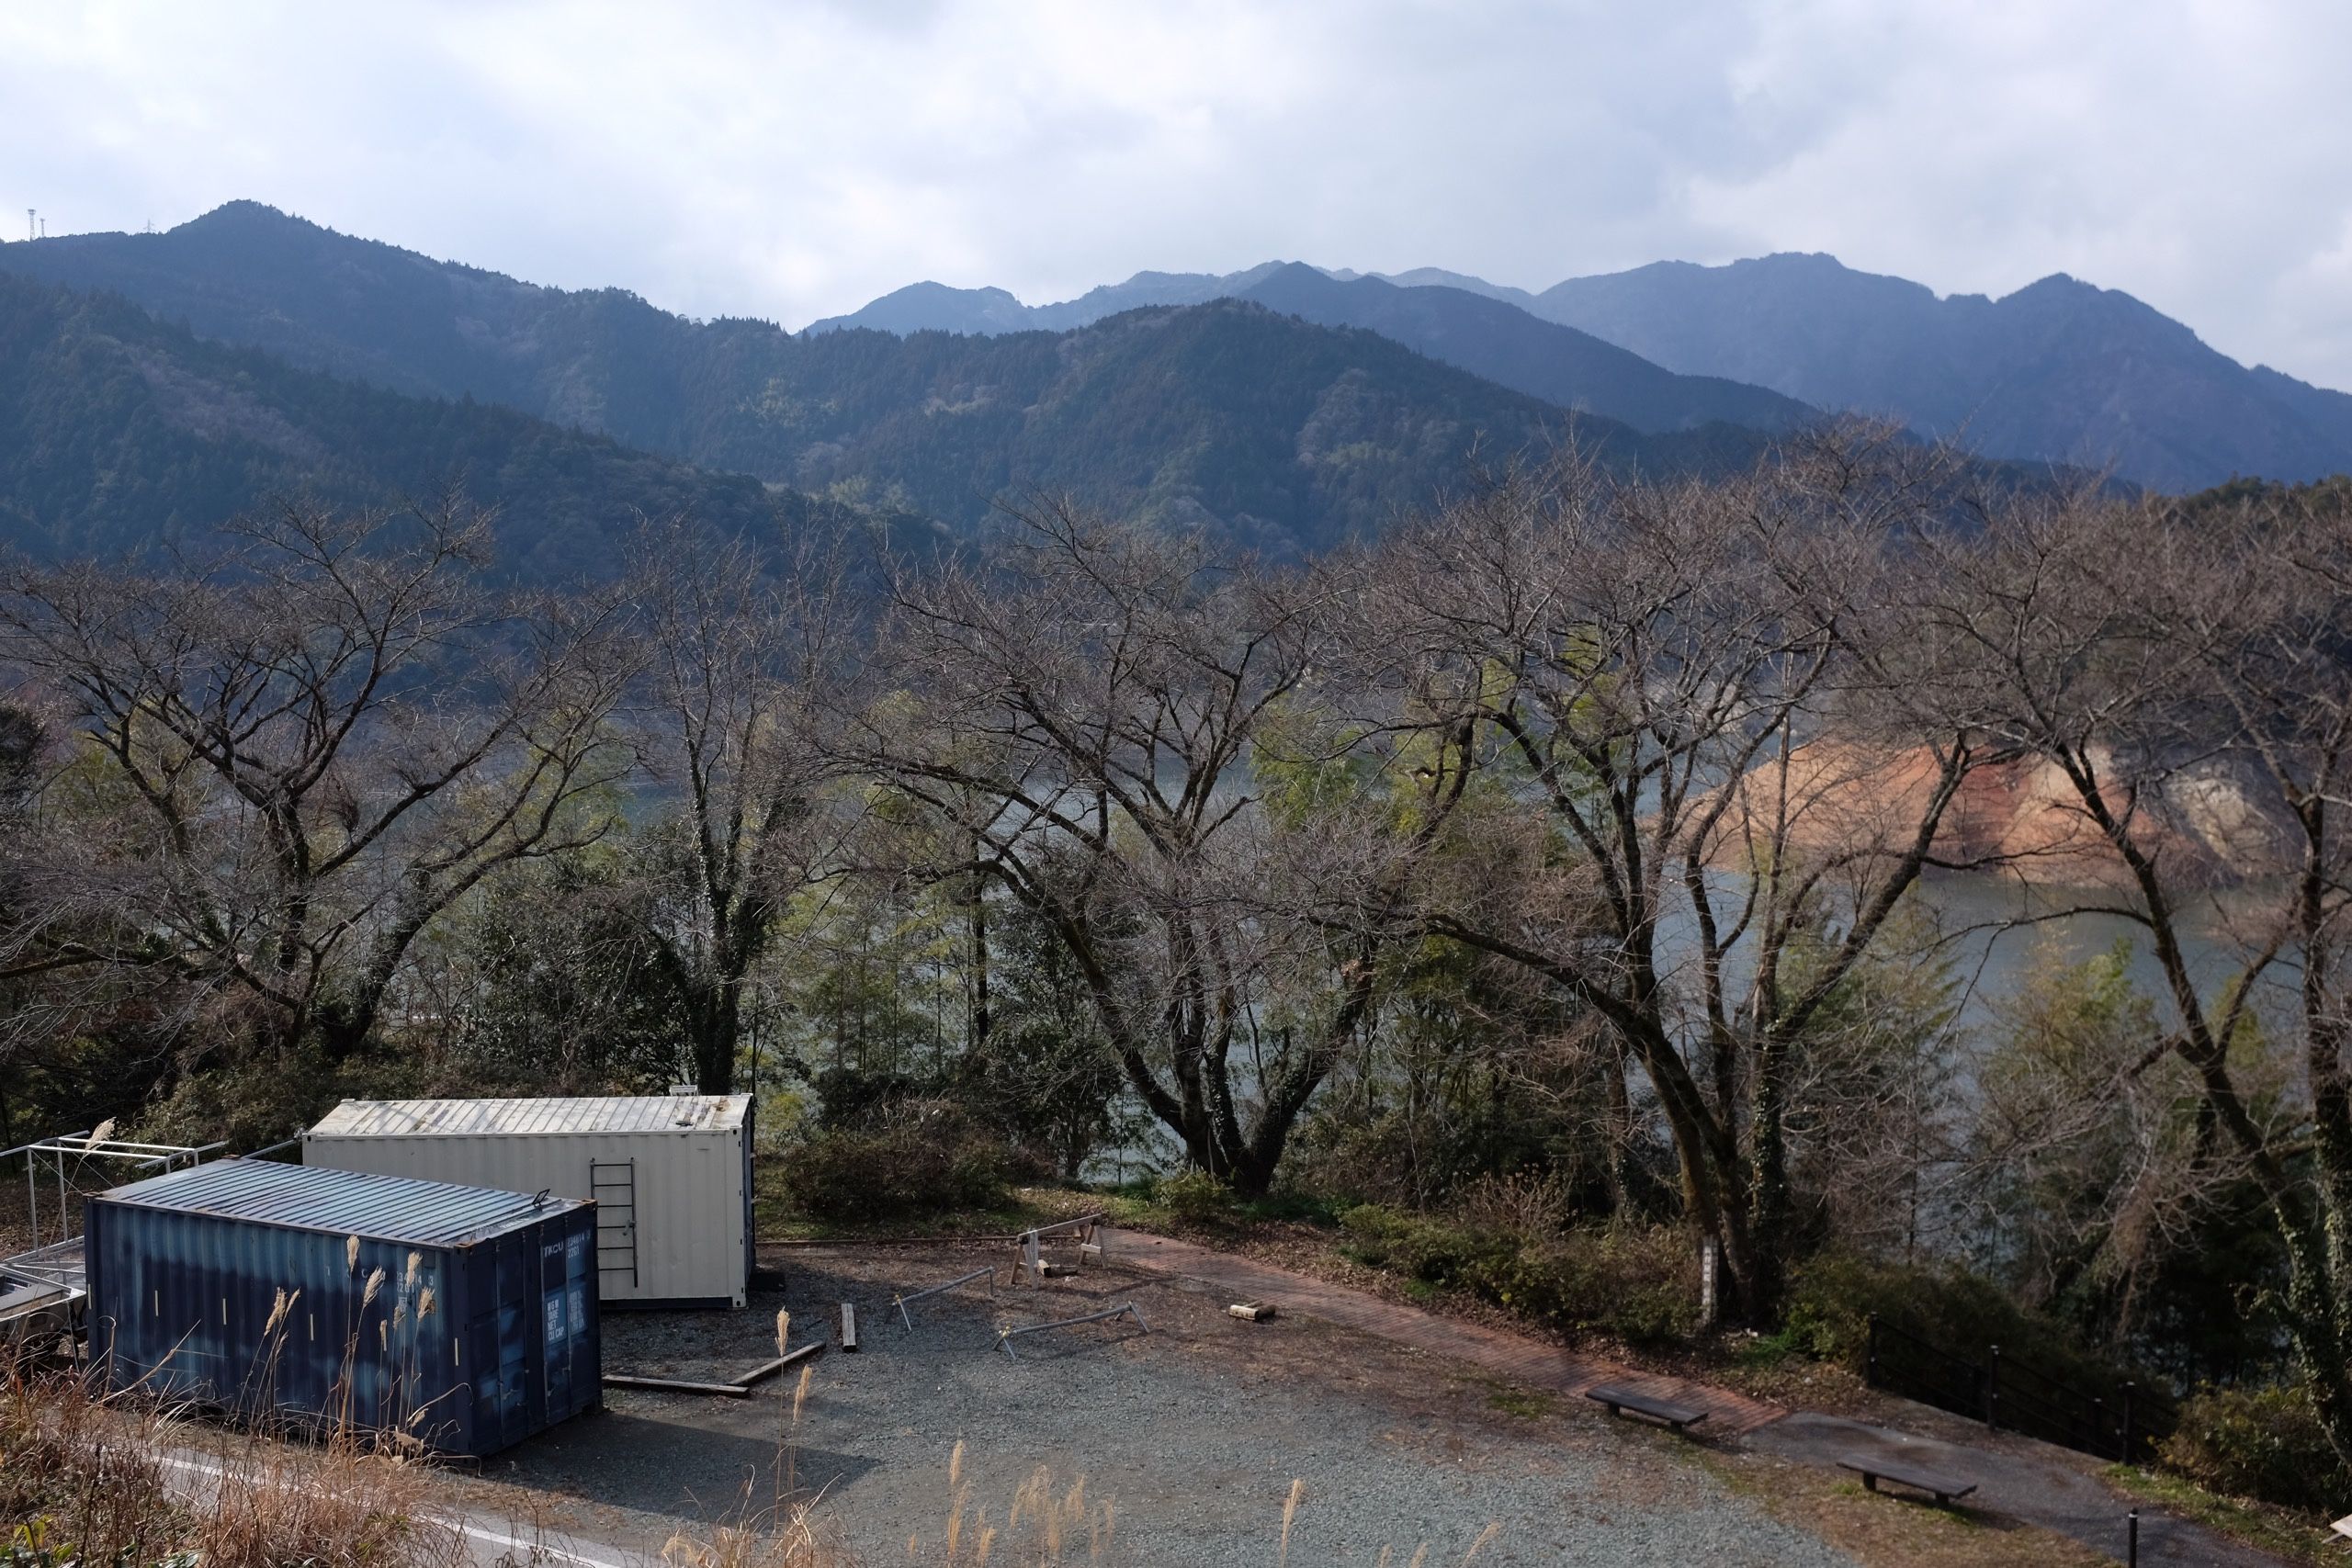 Looking down on two shipping containers in a parking lot in front of a row of large cherry trees. Behind is the artificial lake and the mountains.